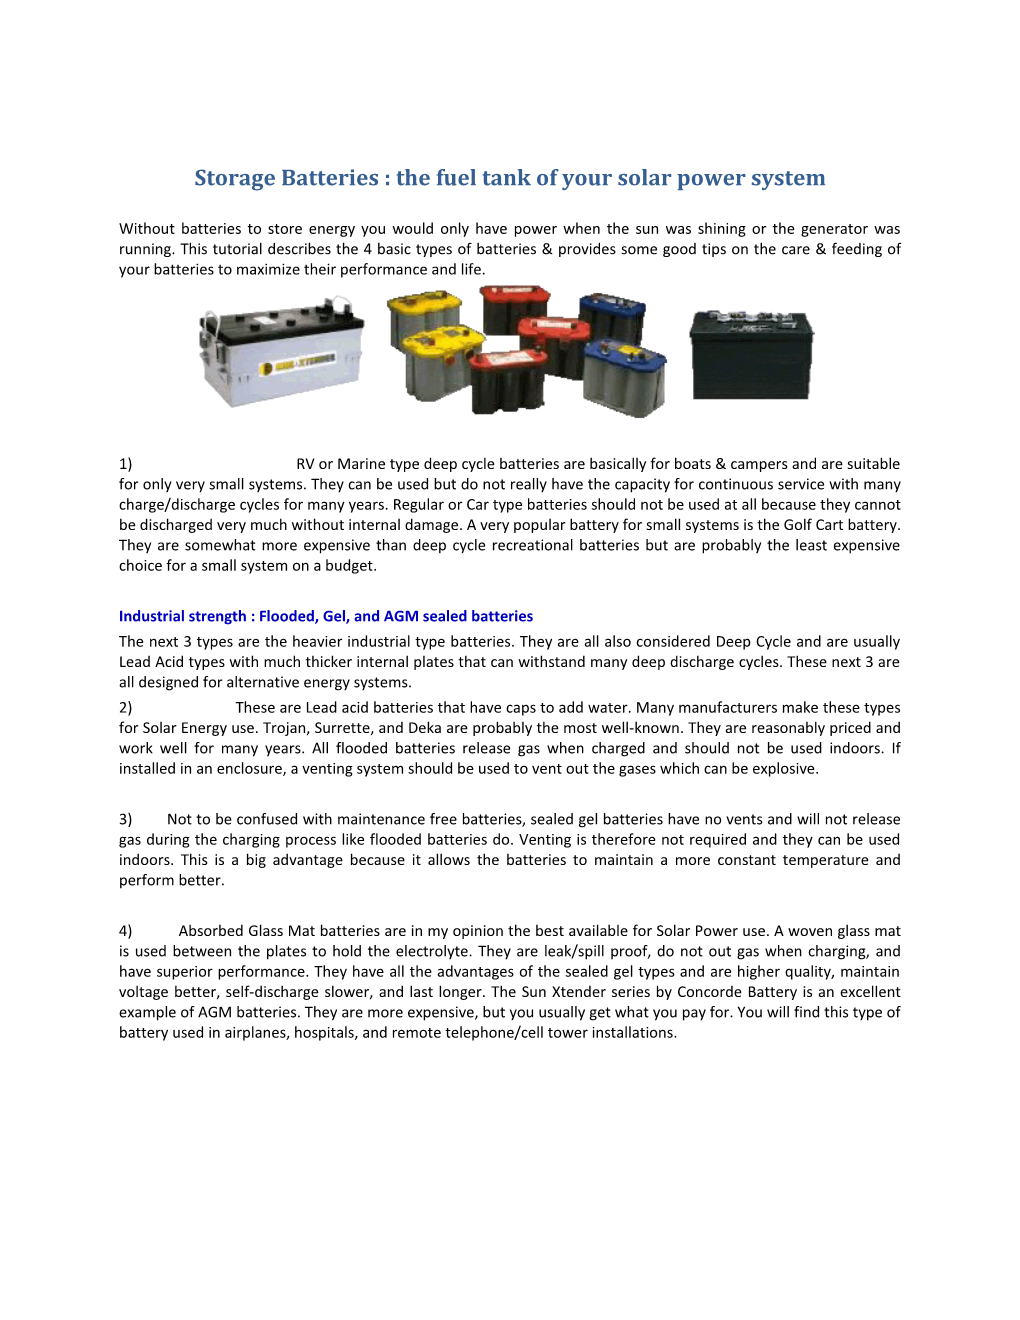 Storage Batteries : the Fuel Tank of Your Solar Power System